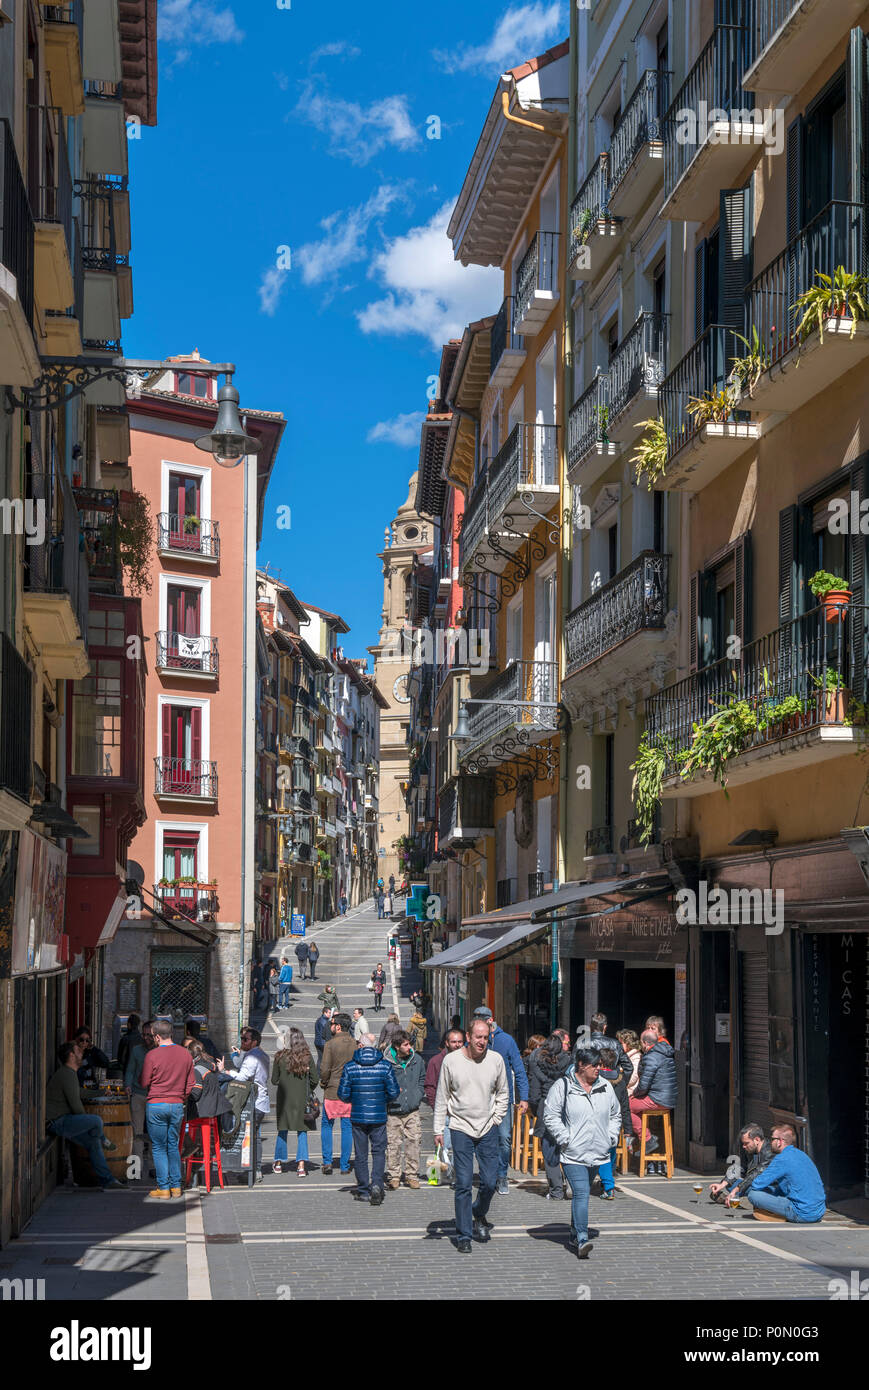 Pamplona, Spain. Bars, shops and cafes on Calle Mercaderes looking towards the cathedral, Casco Antiguo (old town), Pamplona, Navarra, Spain Stock Photo